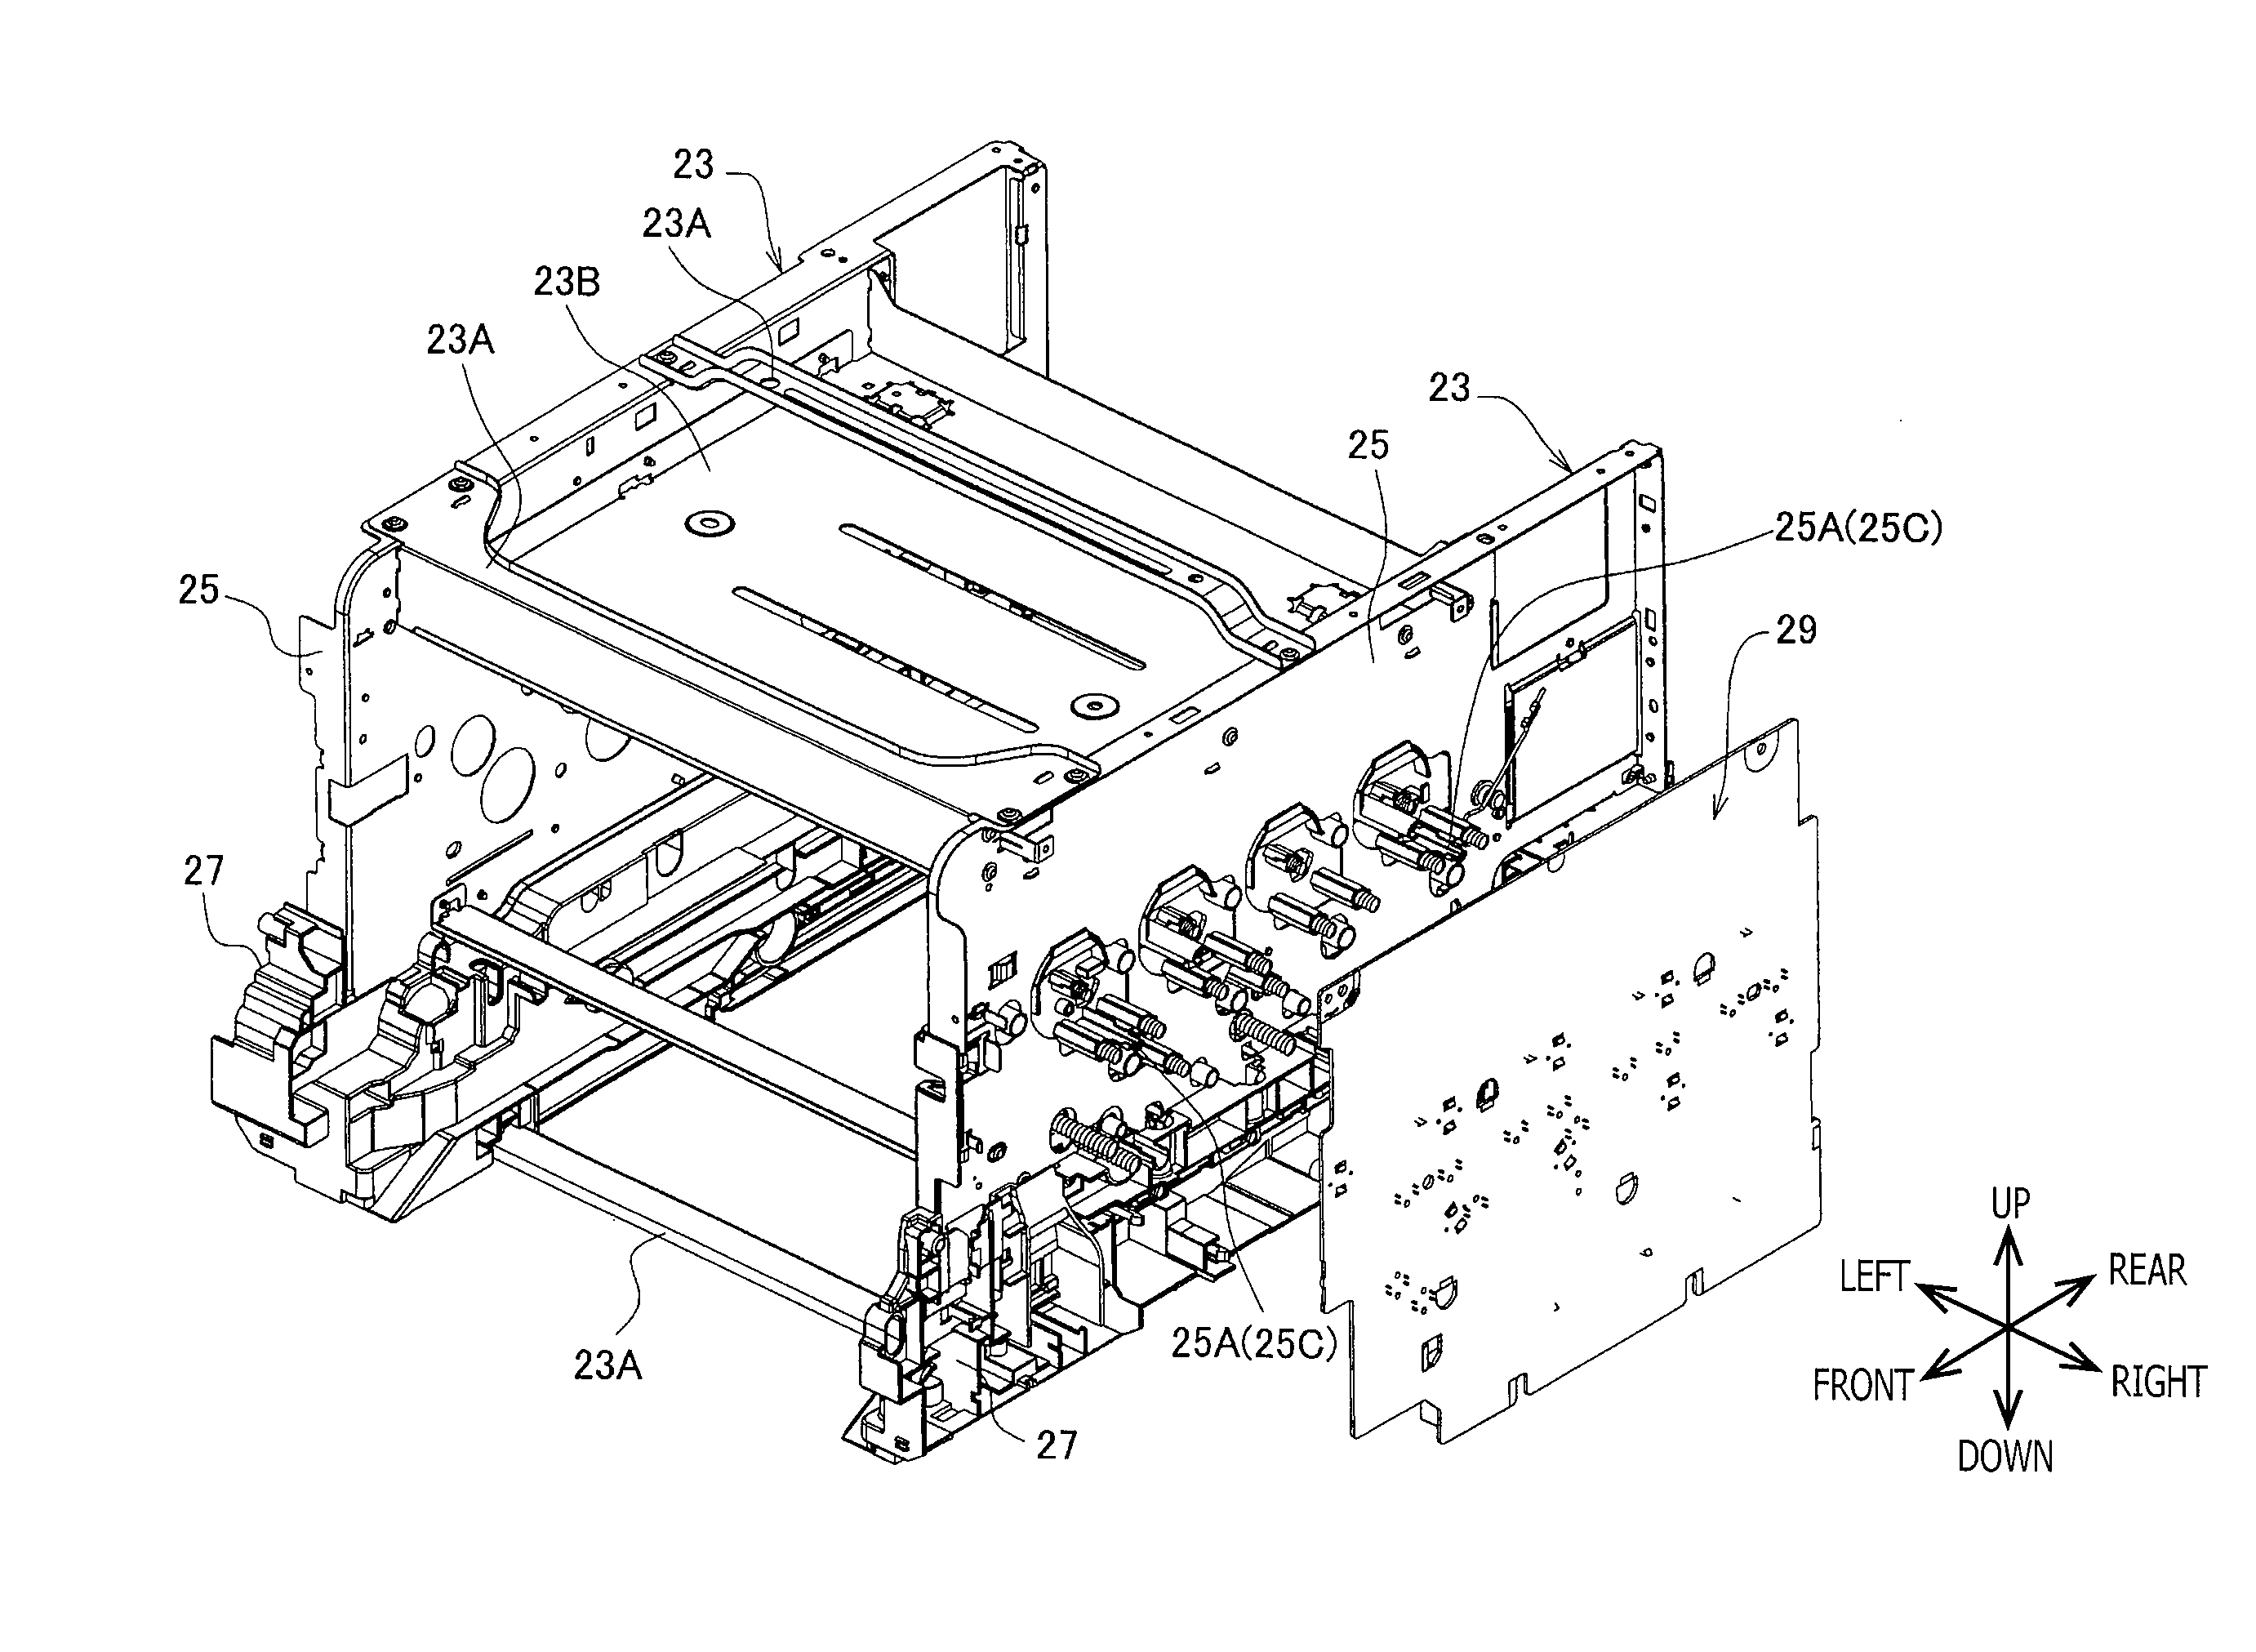 Image formation device having first frame for supporting image formation unit and second frame of lower flexure rigidity